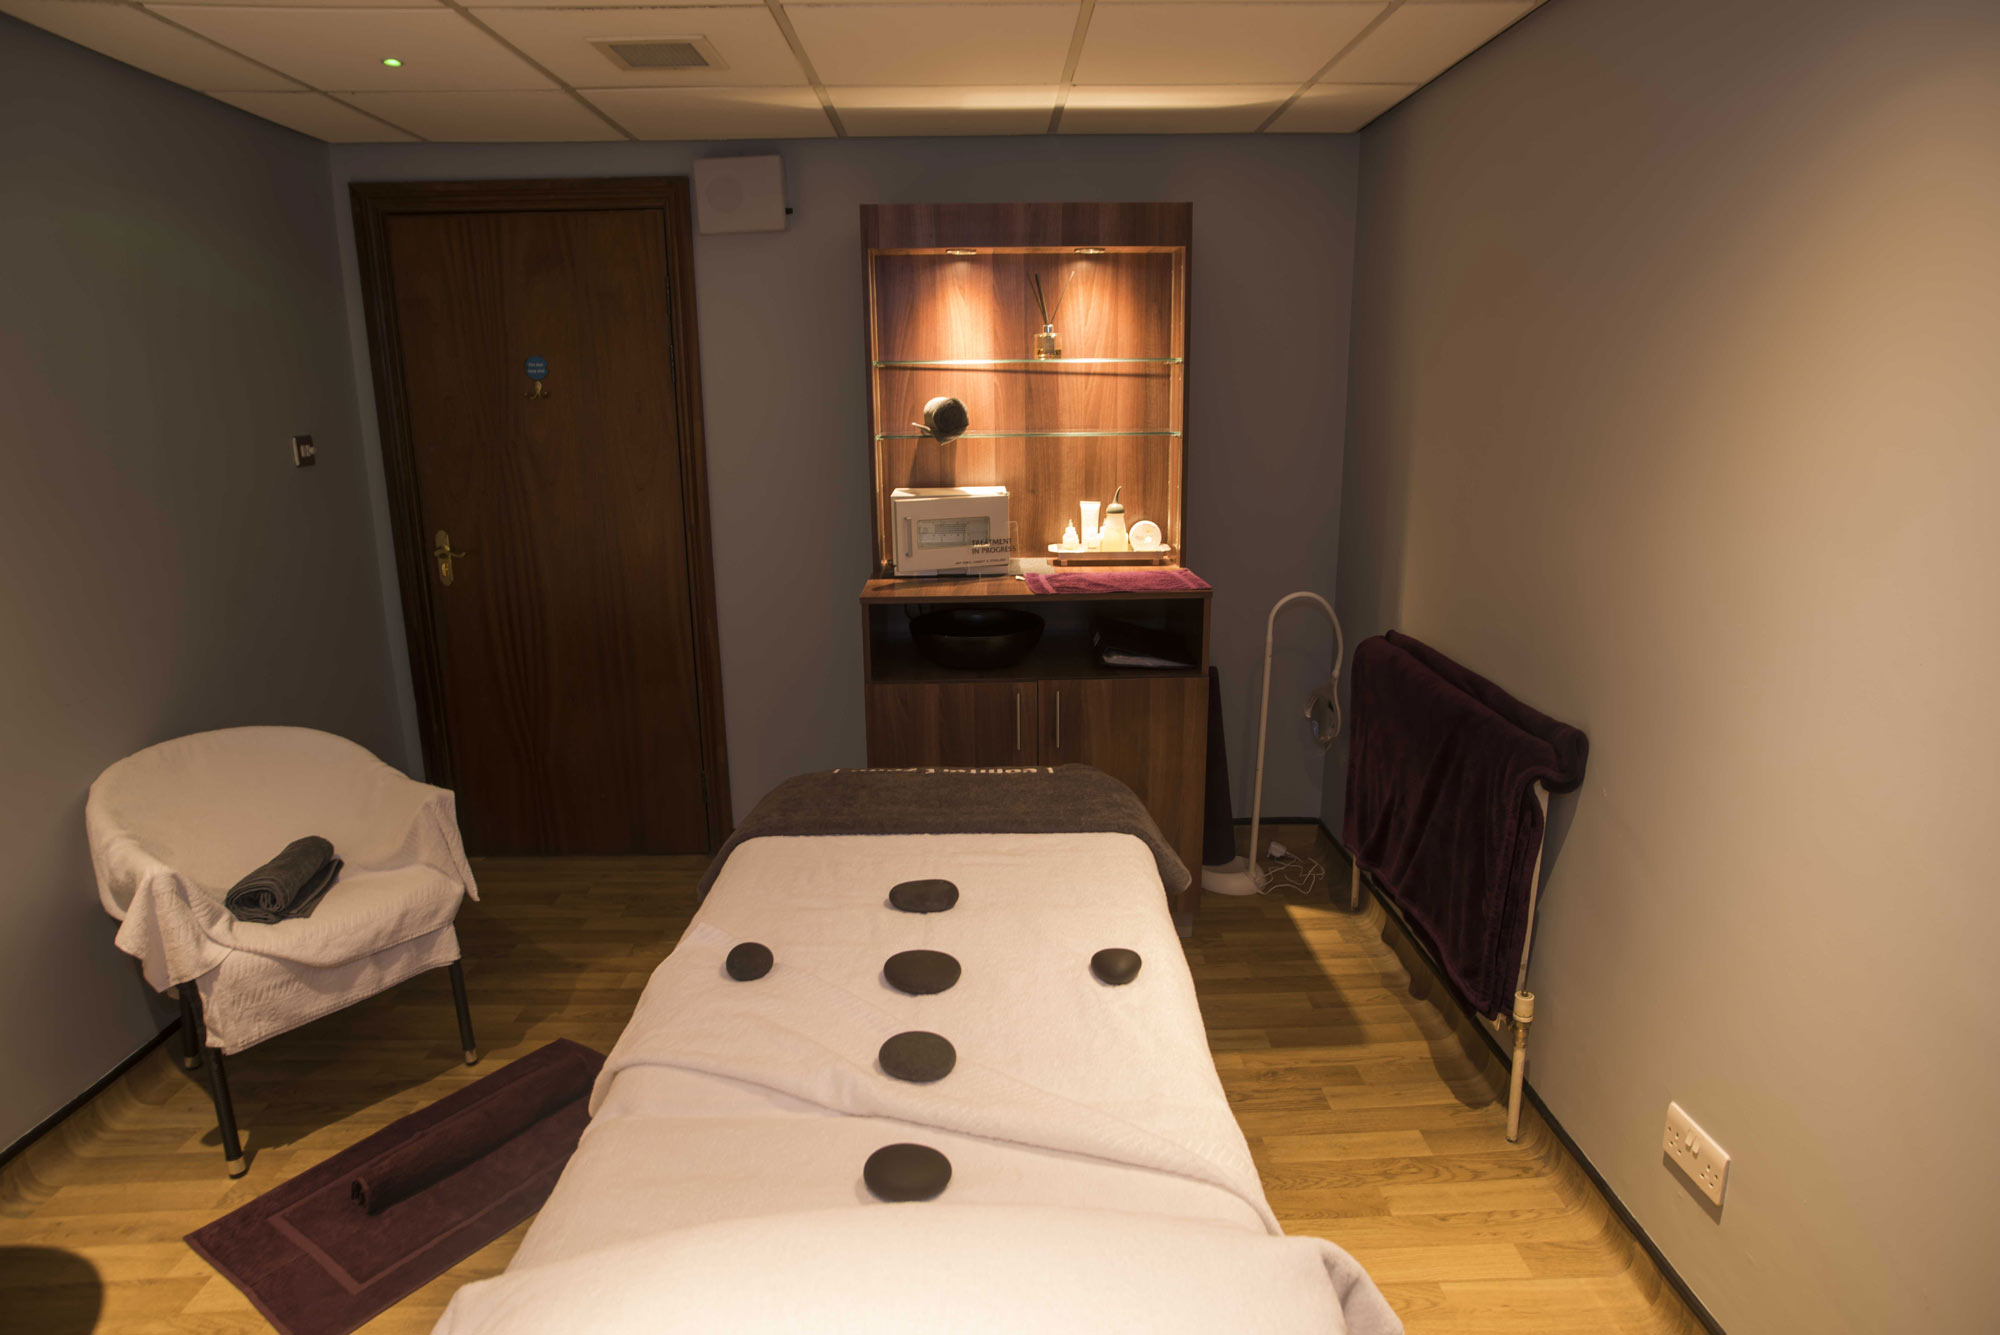 one of the newly refurbished treatment rooms at Harrogate’s Turkish Baths